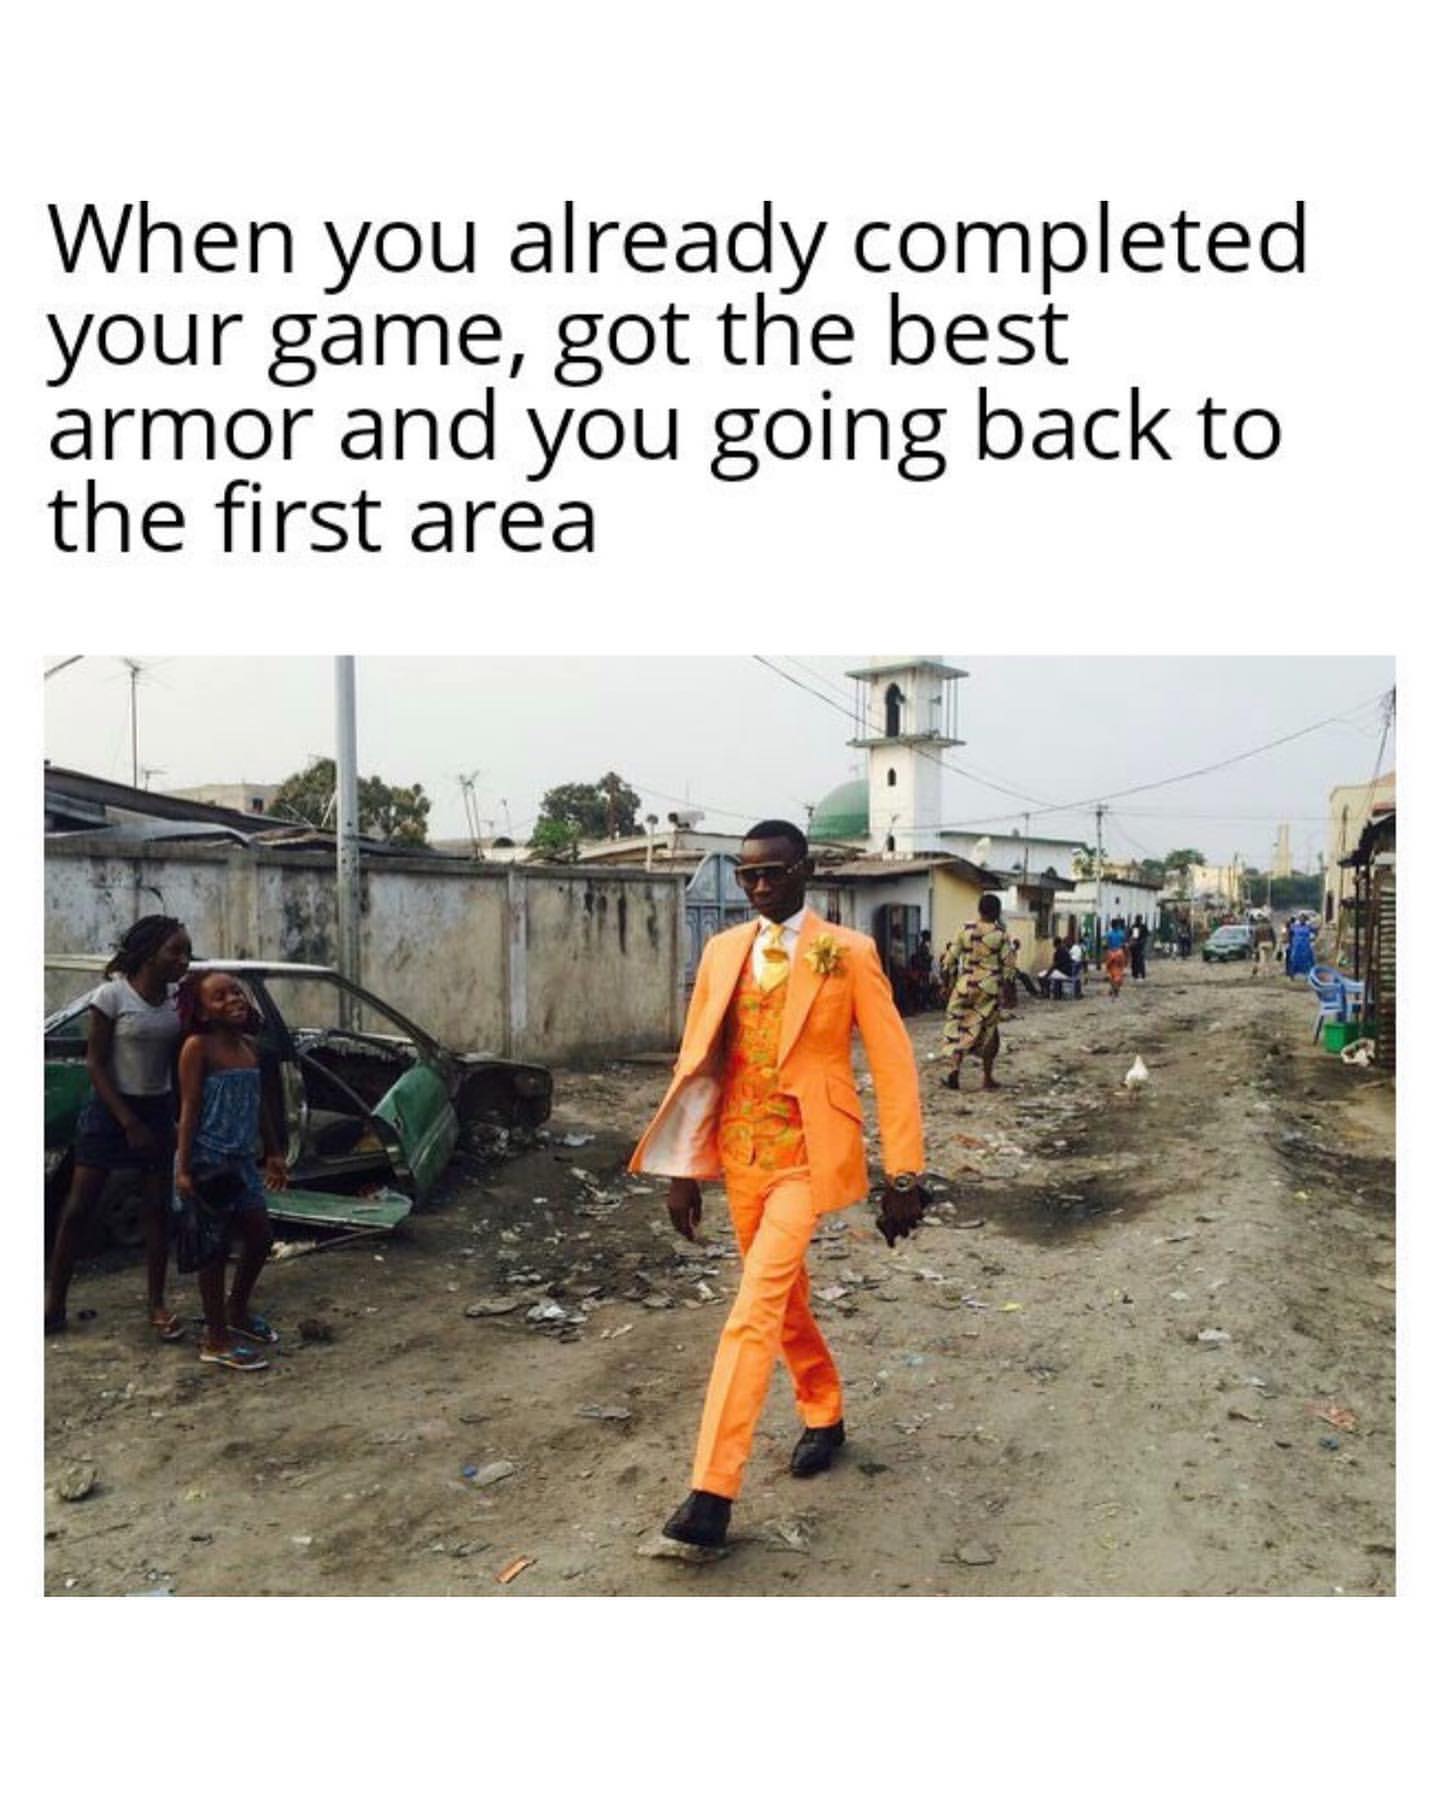 When you already completed your game, got the best armor and you going back to the first area.